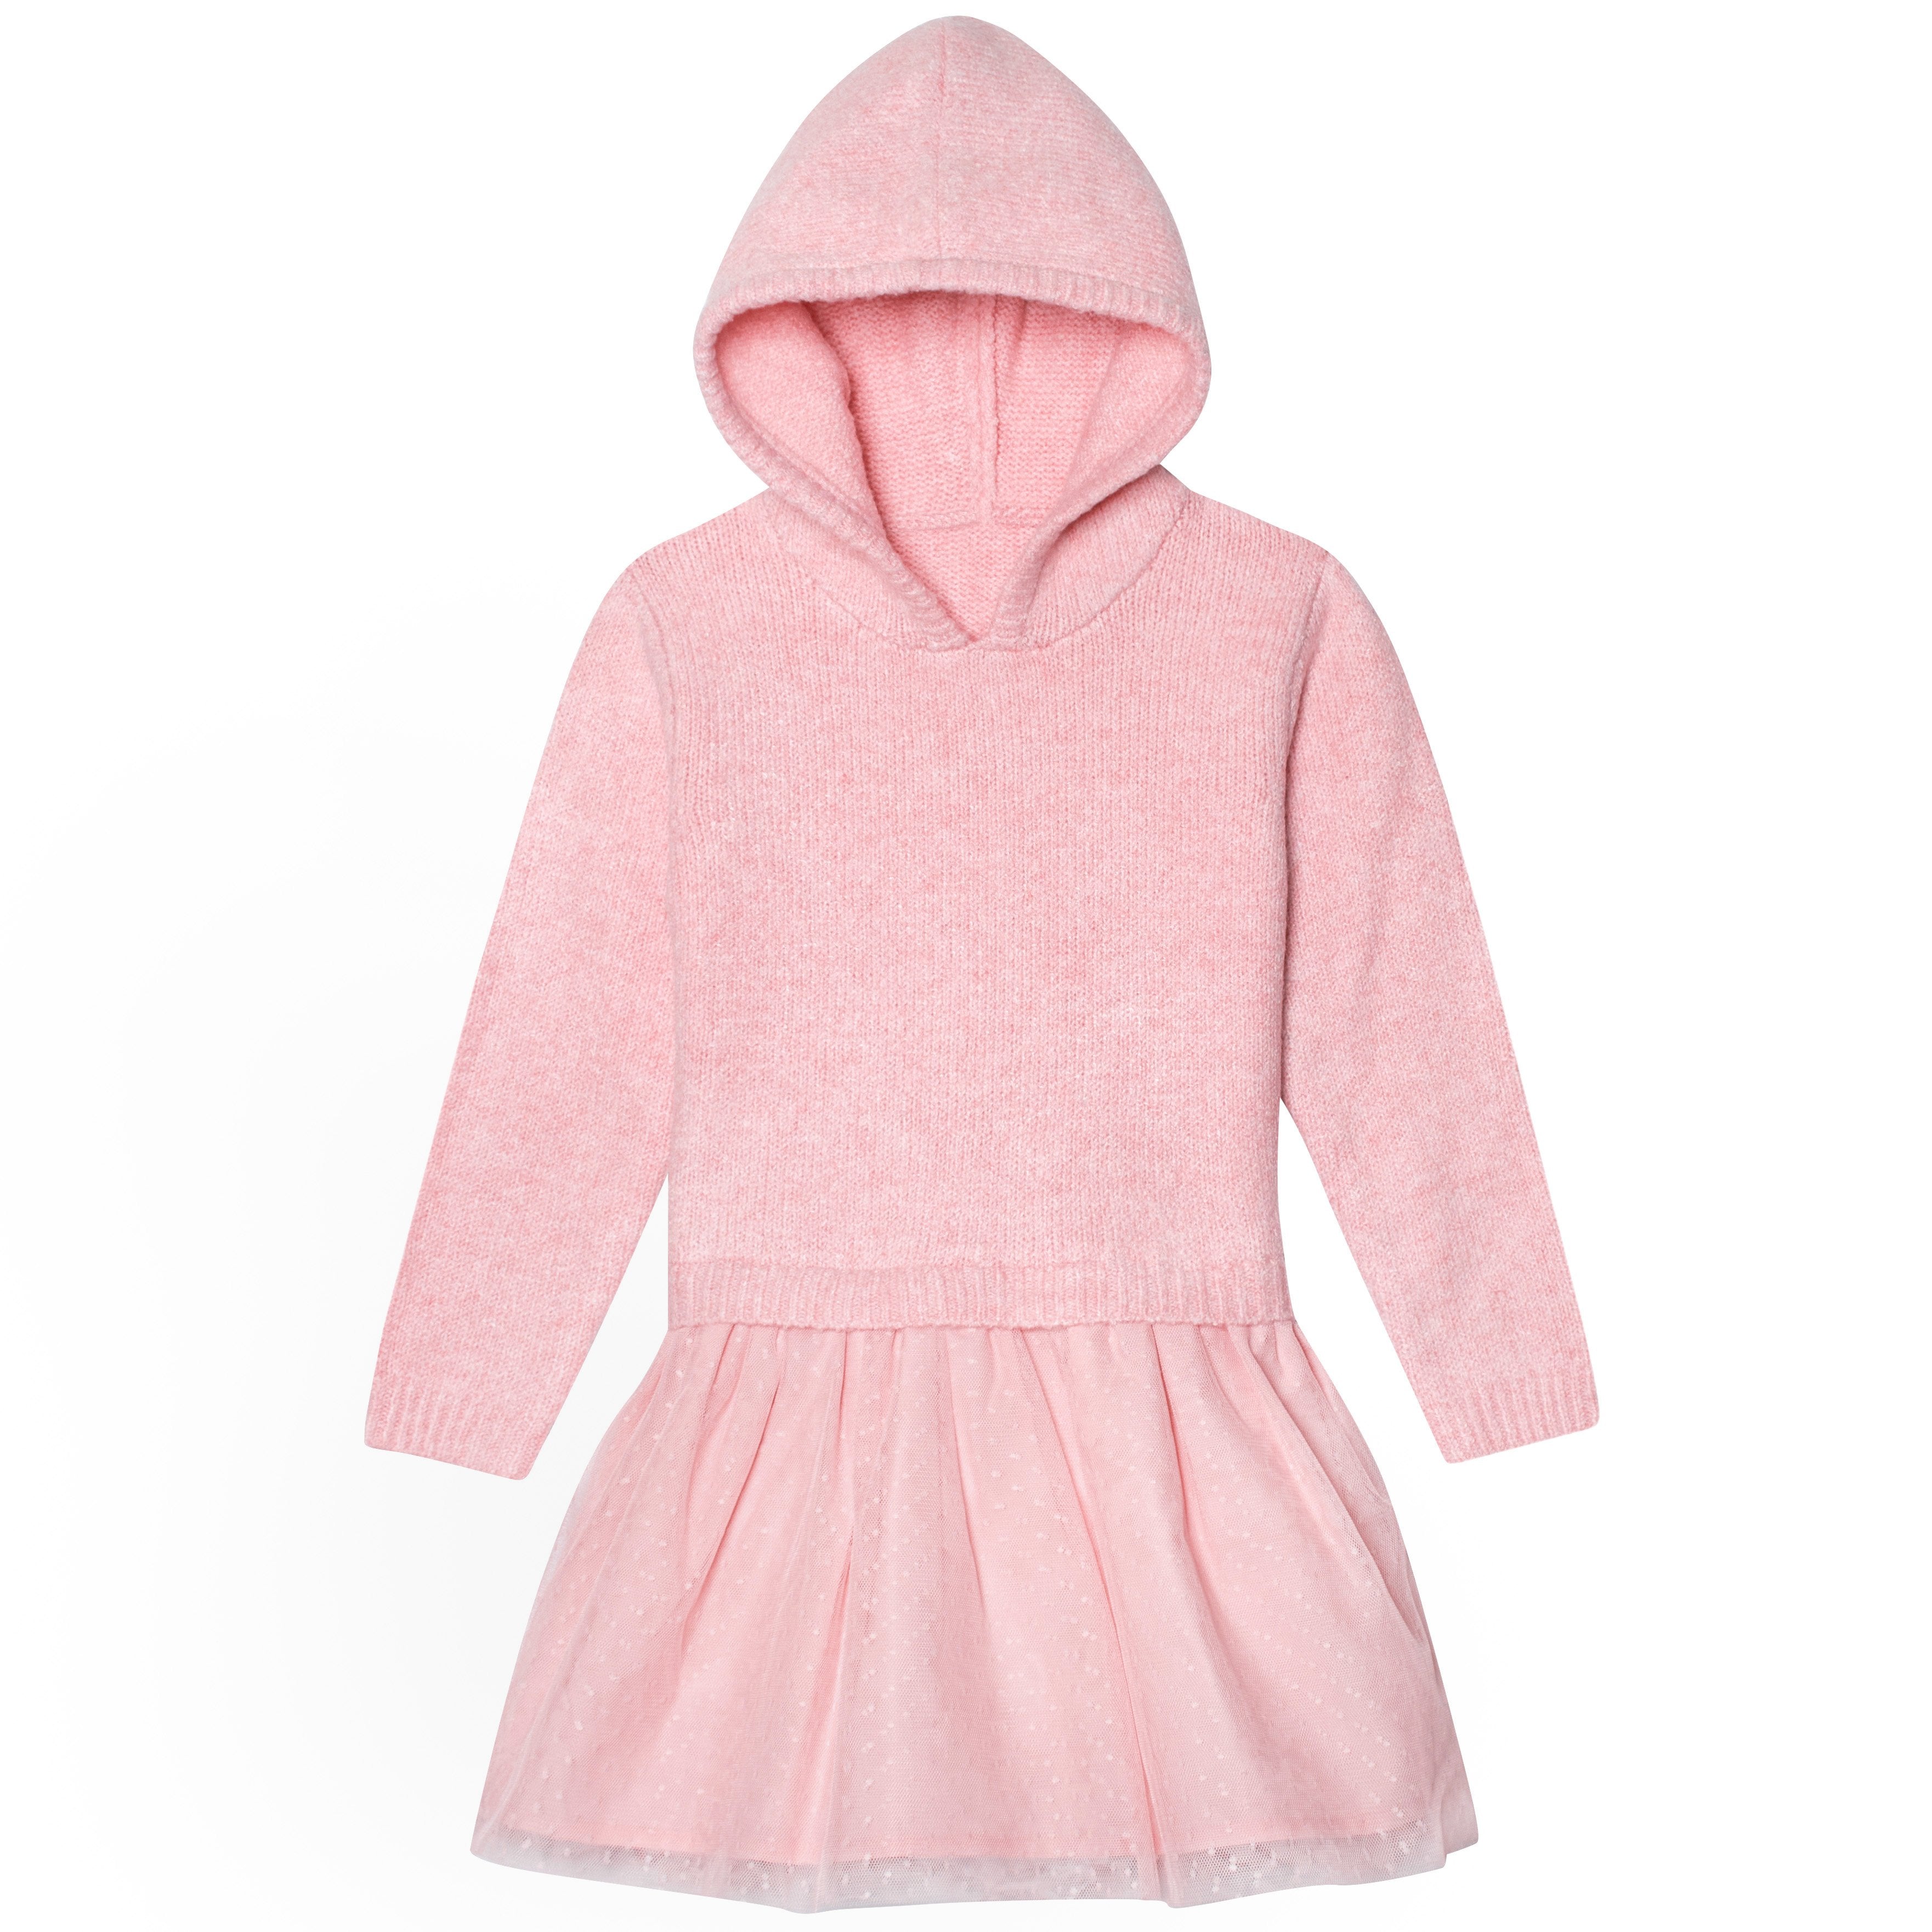 Infant & Toddler Girls Pink Sweater Dress With Tulle Skirt – Gerber ...